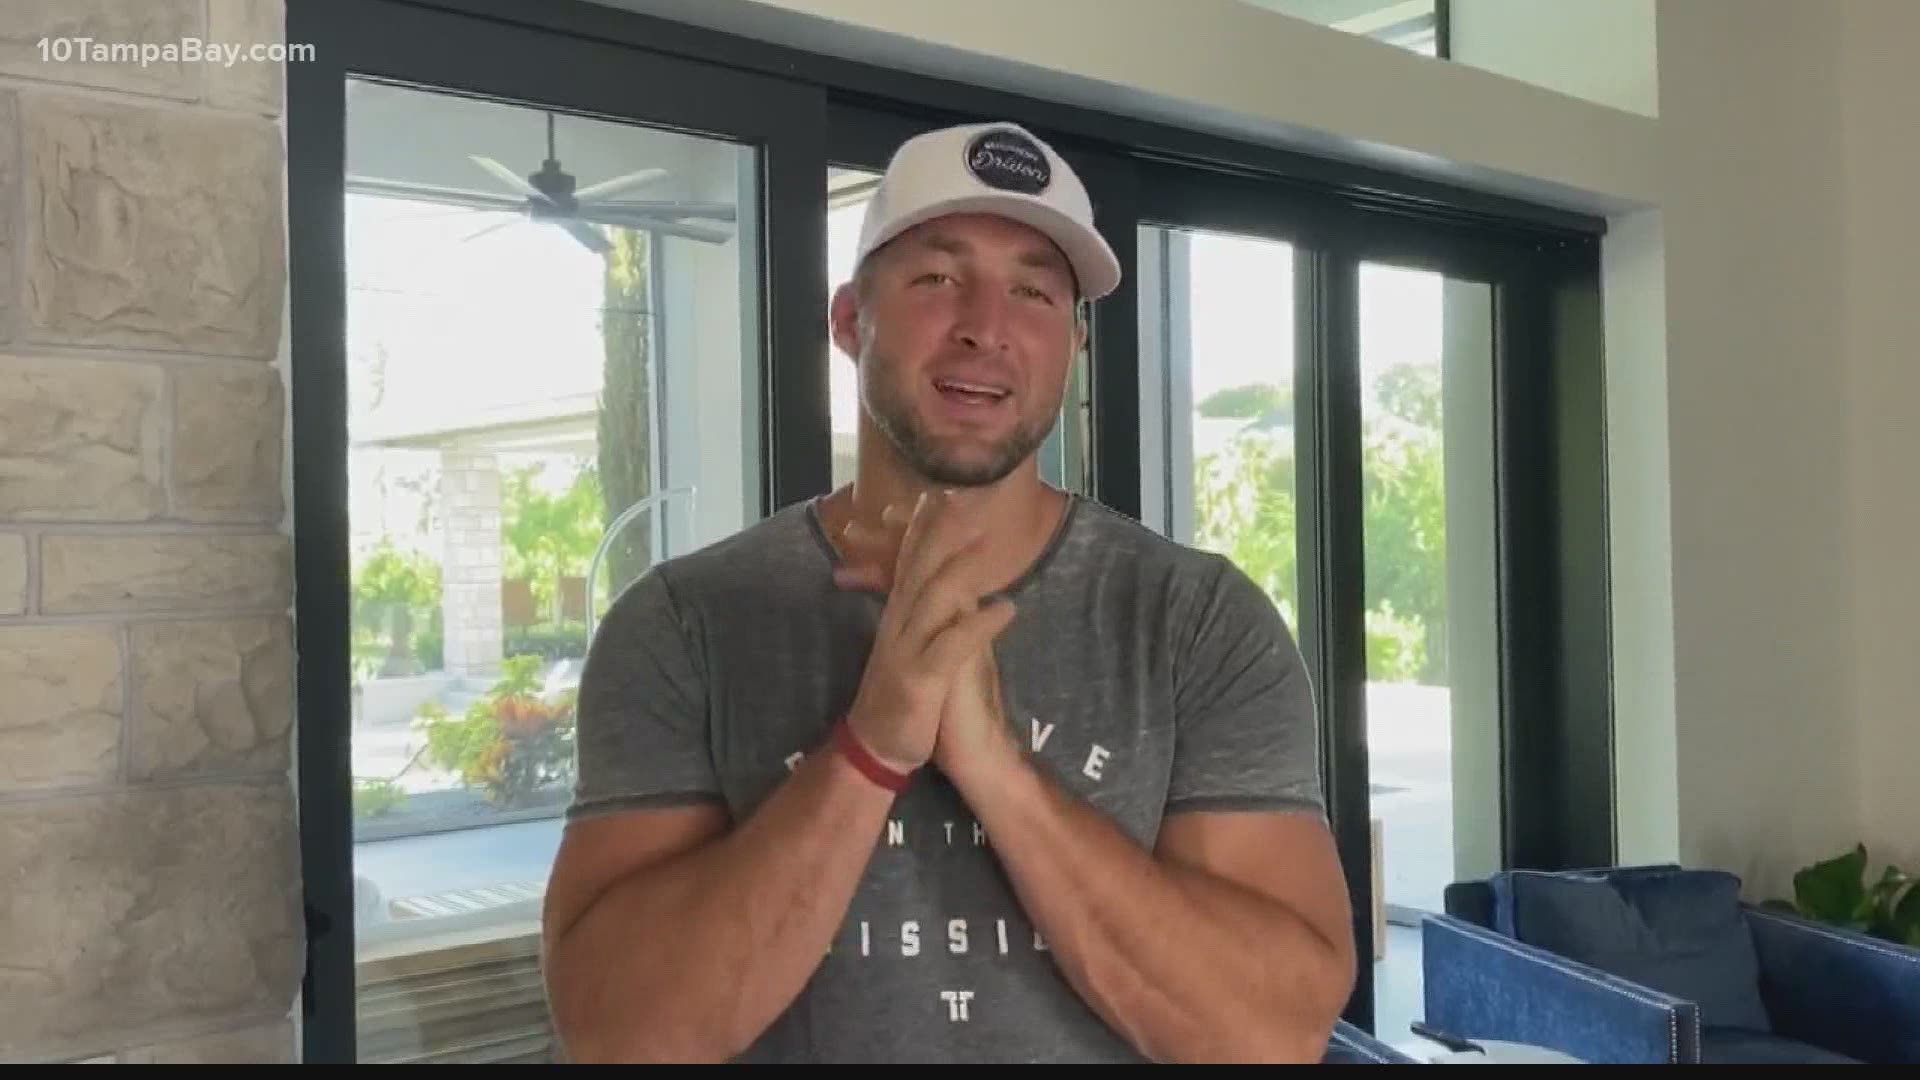 Madison Lipker, from Lakewood Ranch, was shocked to see Tebow encouraging her after a year of treatments for bone cancer.